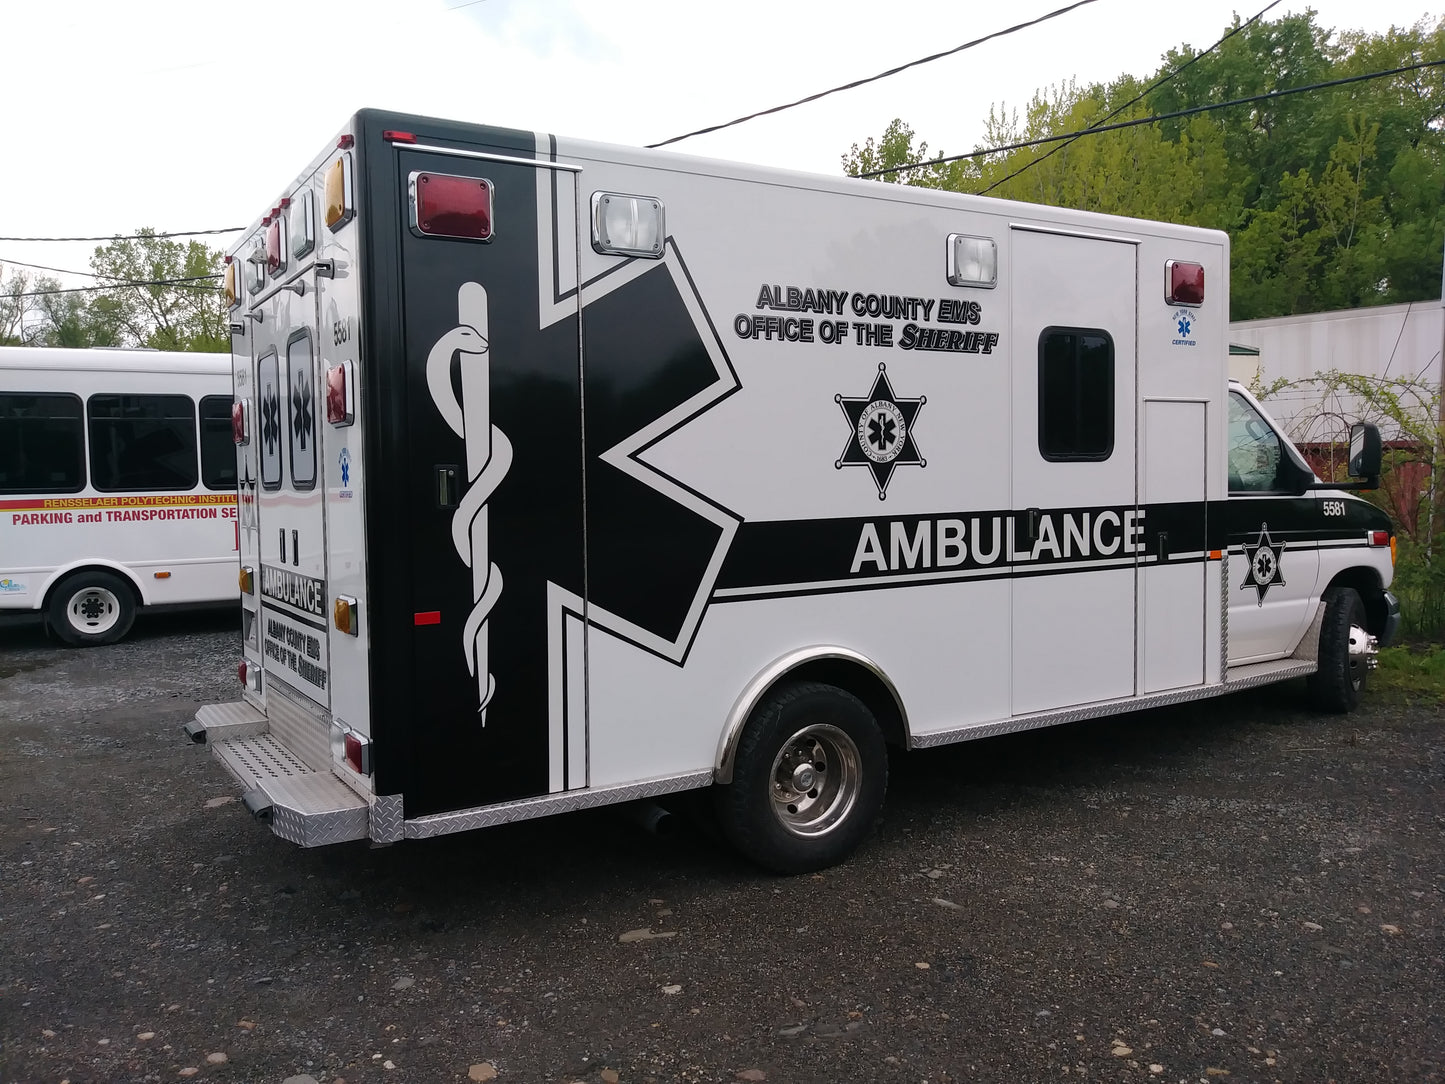 EMS ambulance vinyl graphics kit produces and installed by All Signs & Graphics Inc.  The design features a vinyl wrap with reflective vinyl graphics and lettering installed, as well as printed perforated view through vinyl  graphics installed on rear windows.